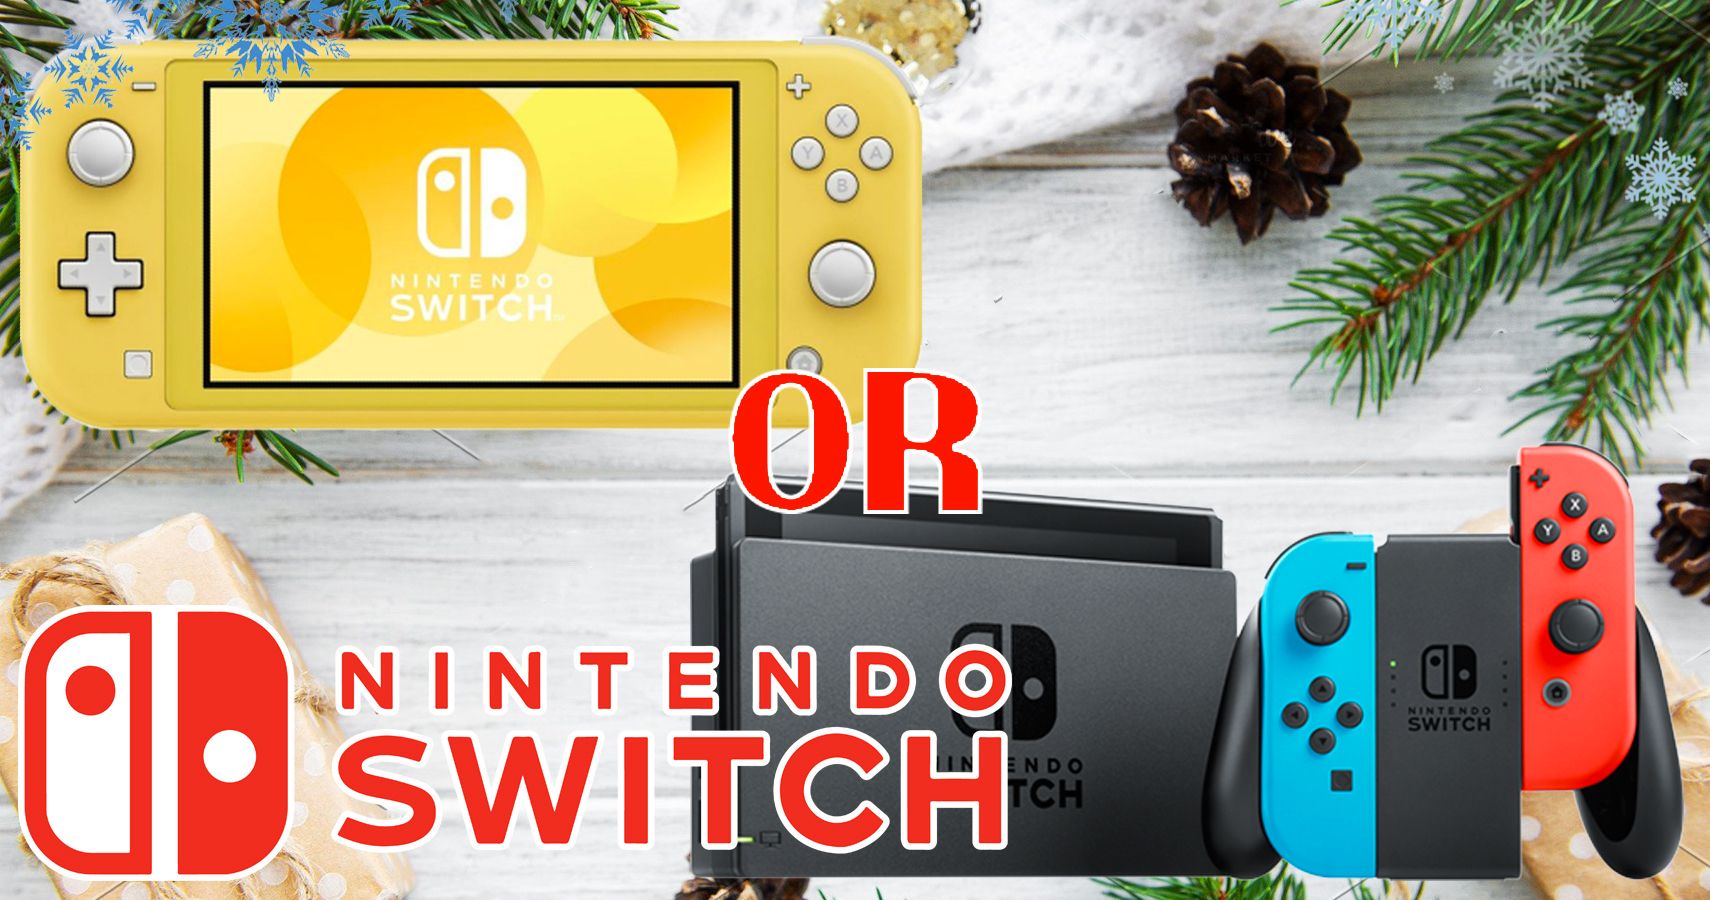 Holiday Gift Guide Should You Buy An Original Switch Or A Switch Lite?